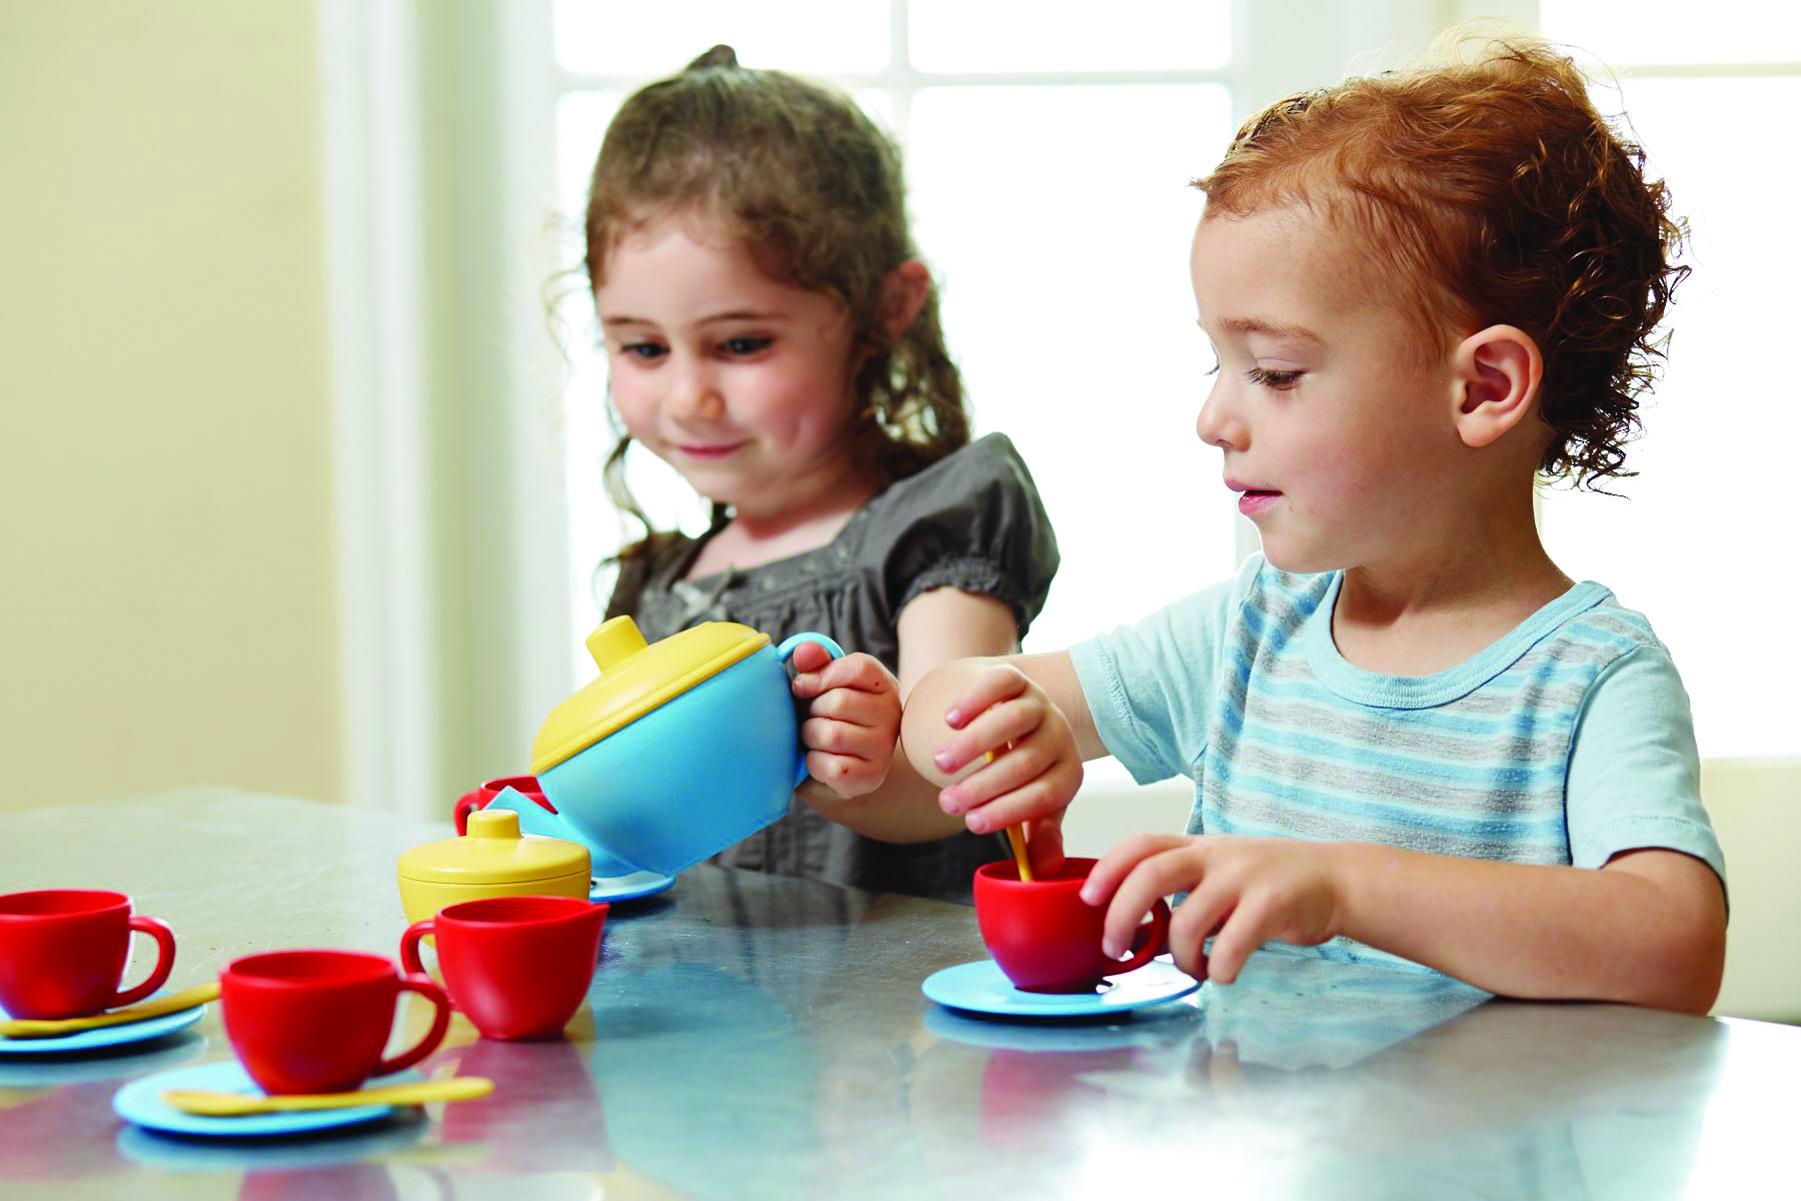 Eco-friendly children's play tea-set made entirely from recycled plastic.